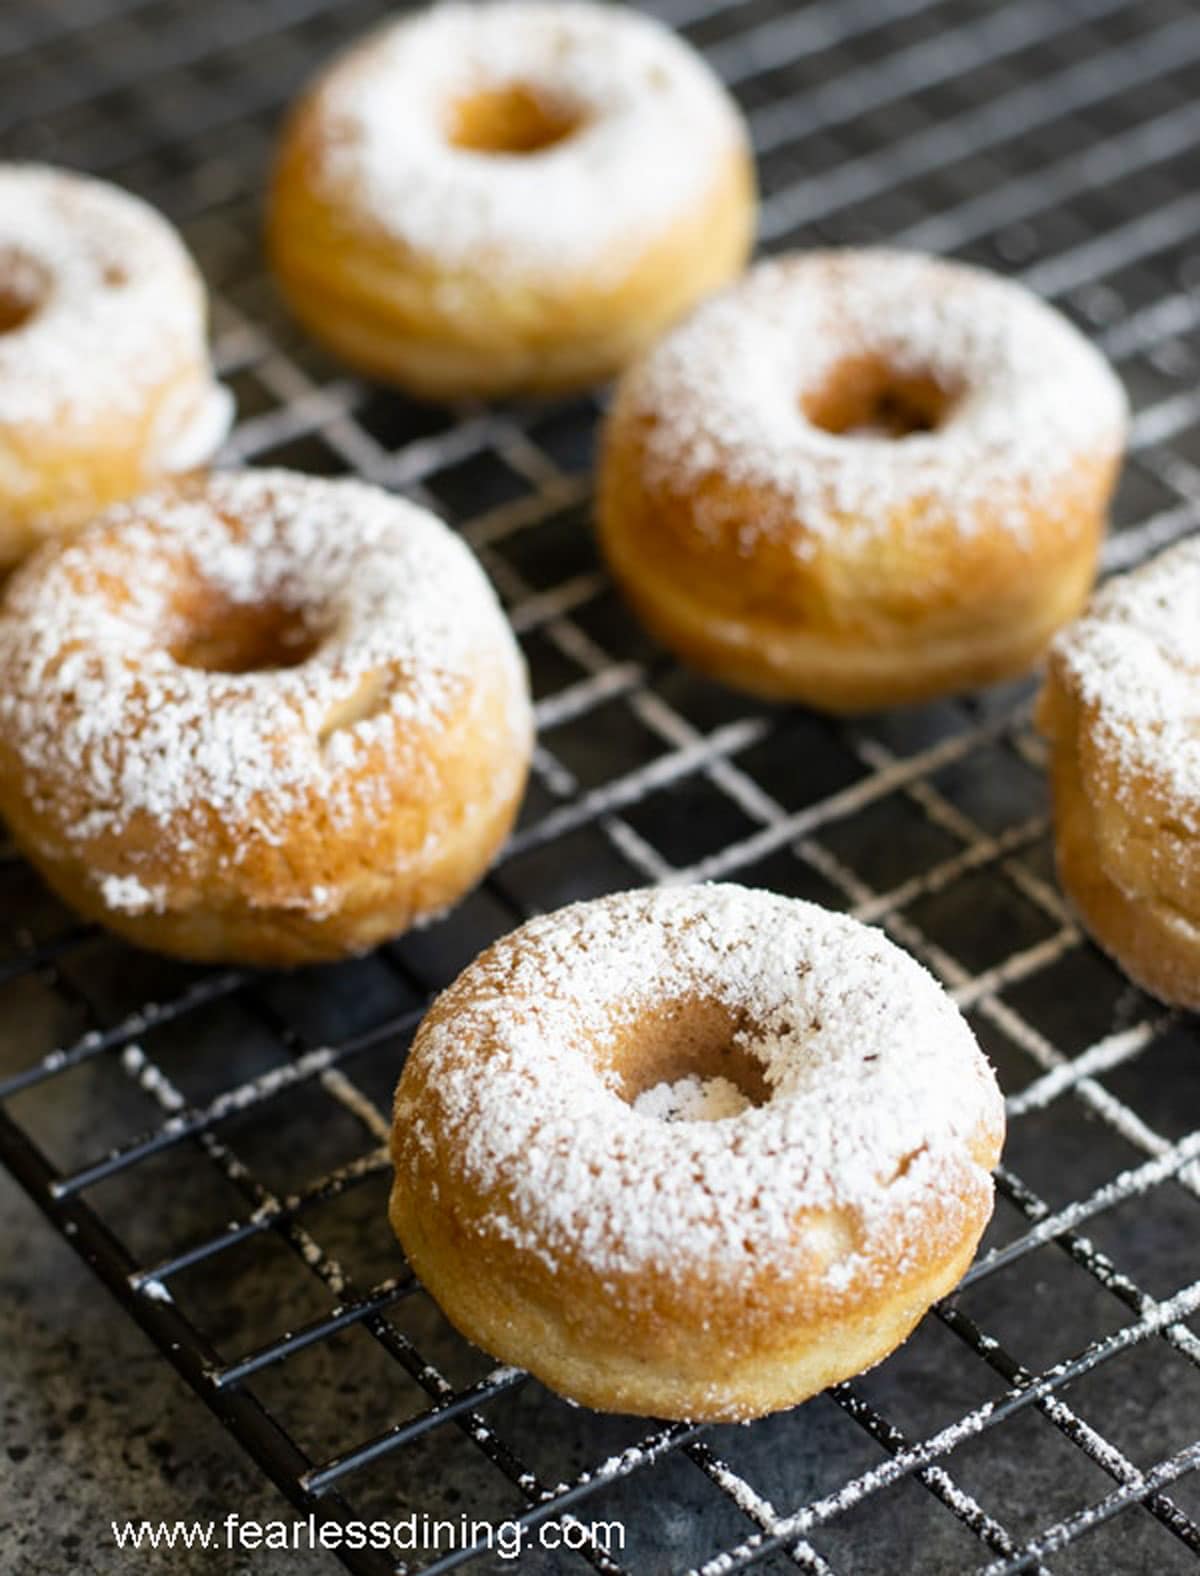 a rack of egg-free donuts with powdered sugar dusted over them